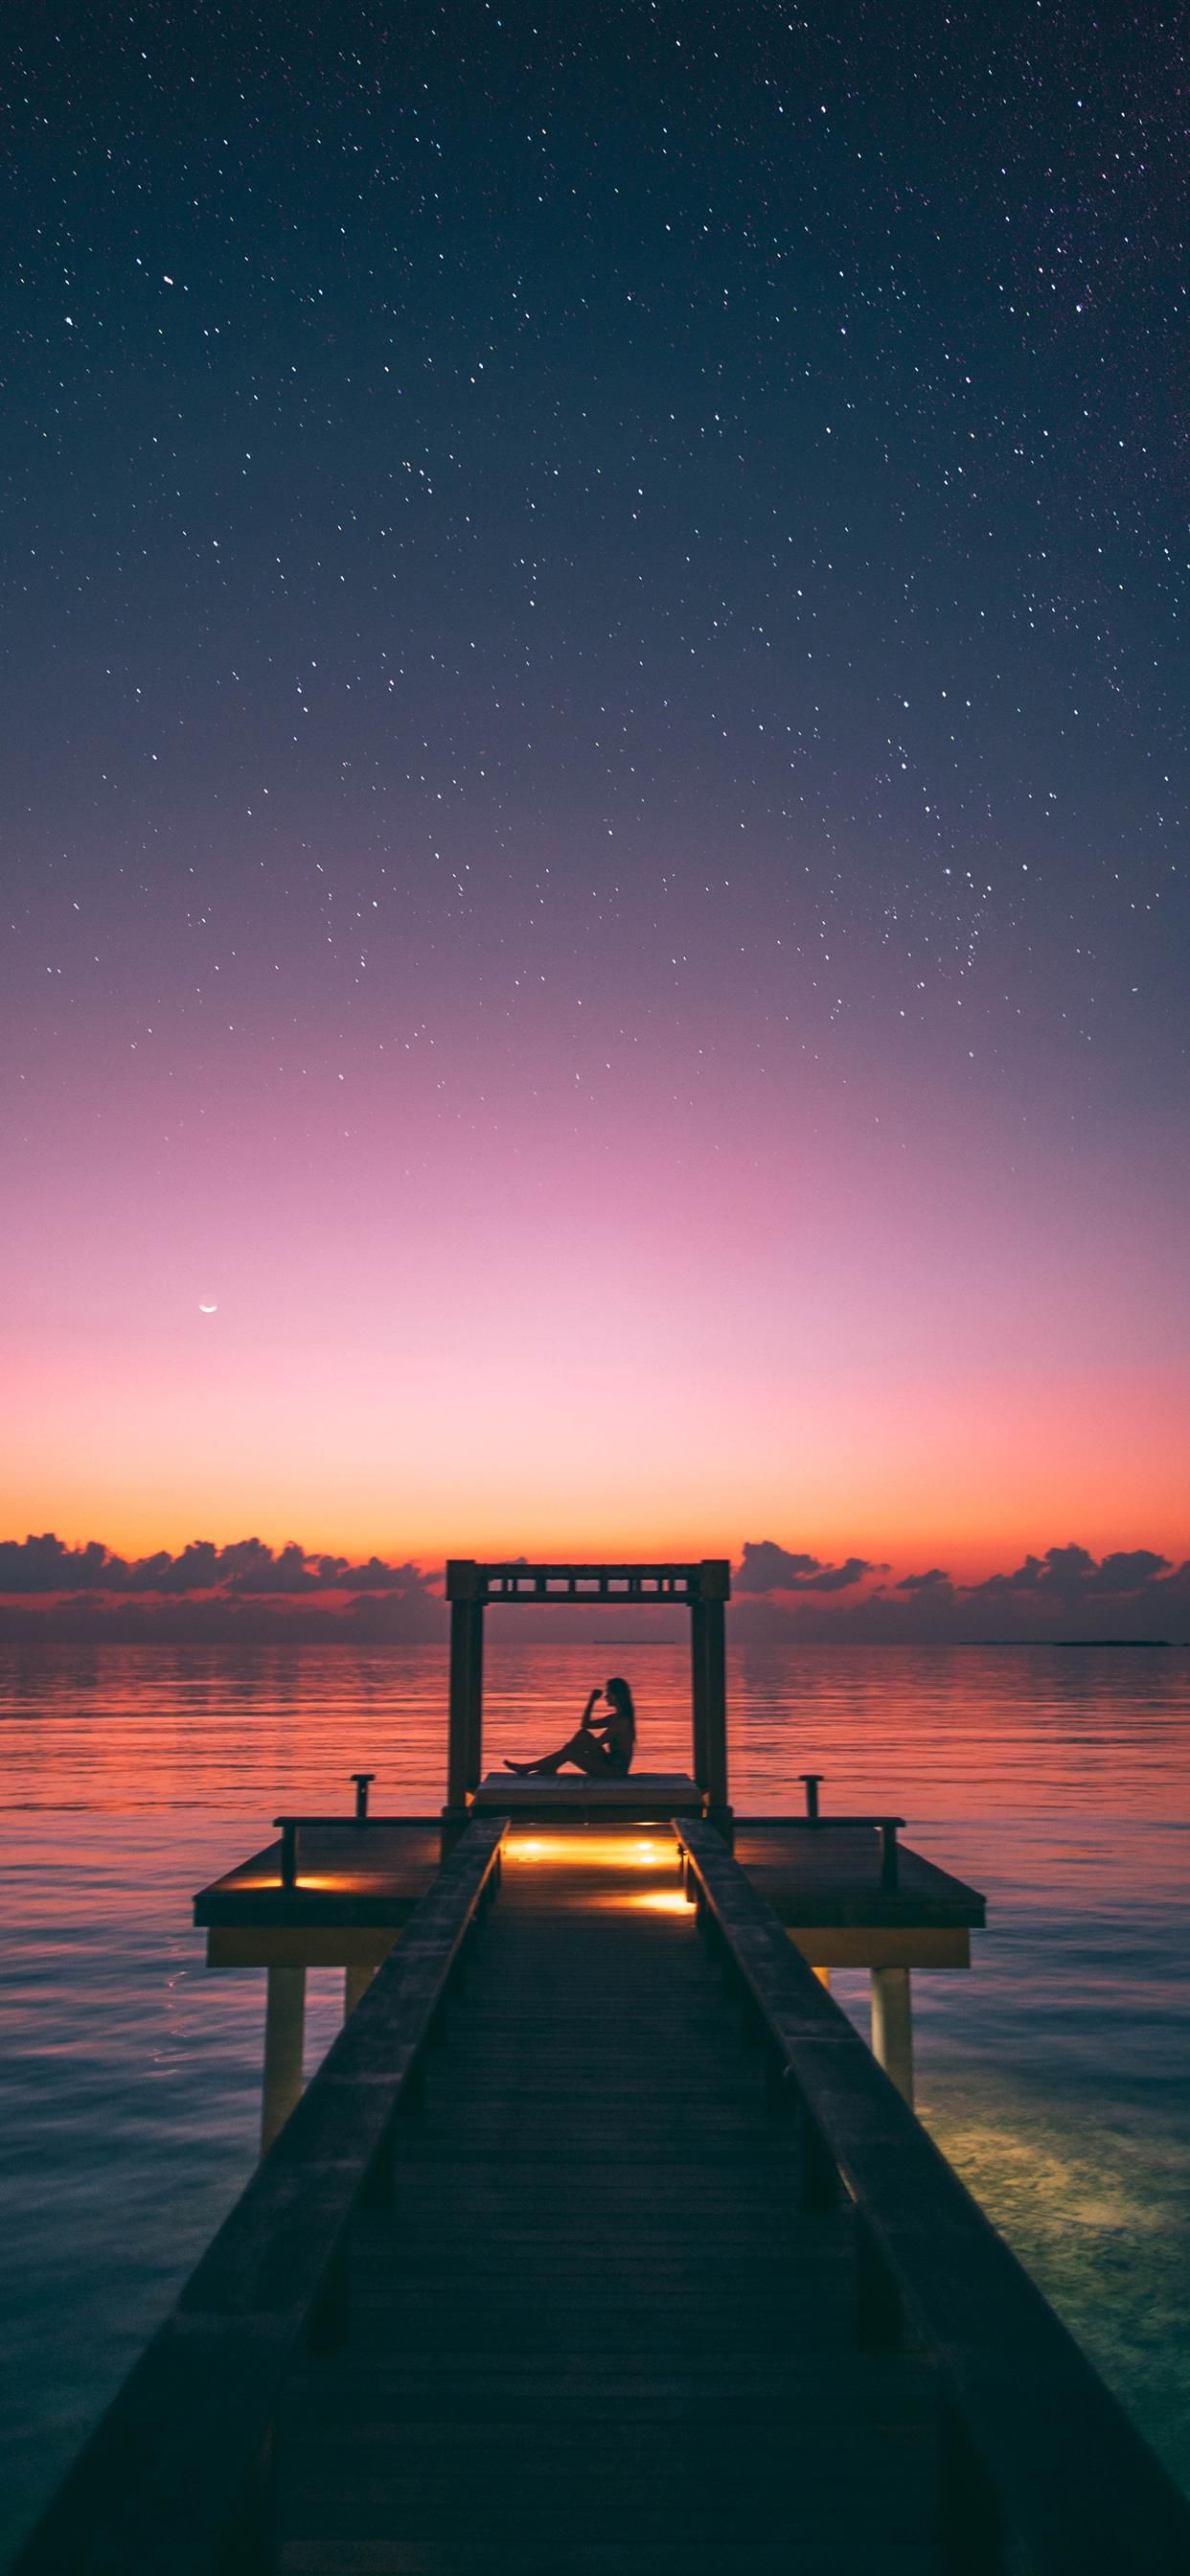 A starry night in the Maldives A surreal moment. iPhone X Wallpaper Free Download